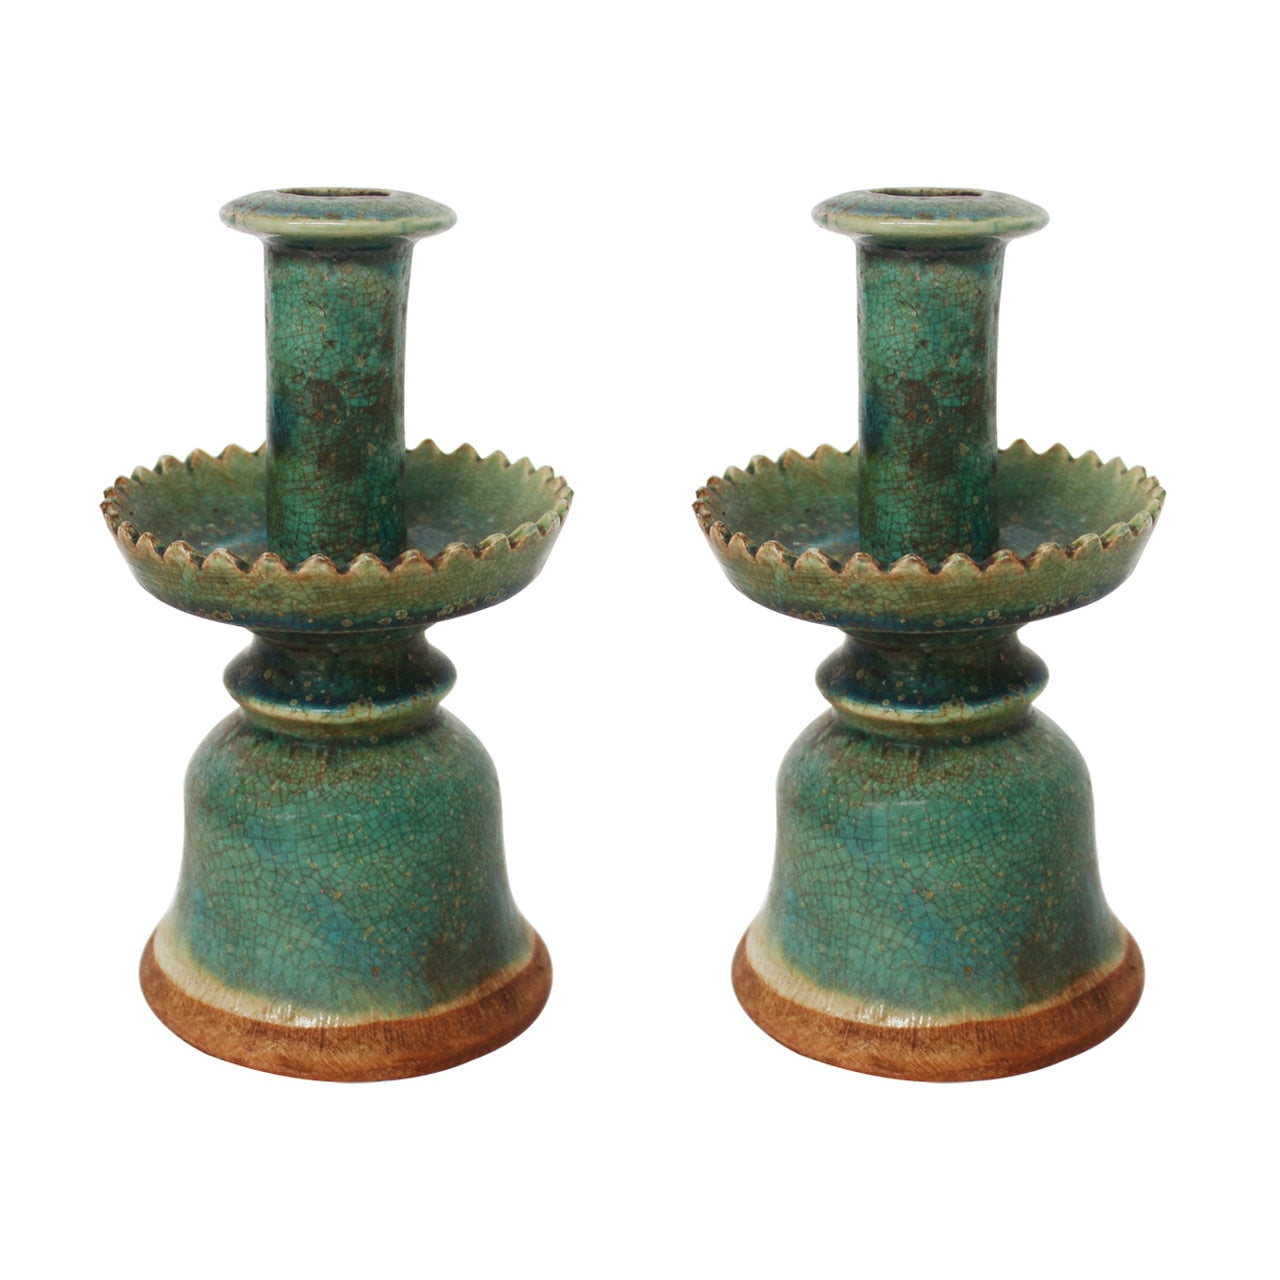 pair of green pottery candle holders with serrated edge design